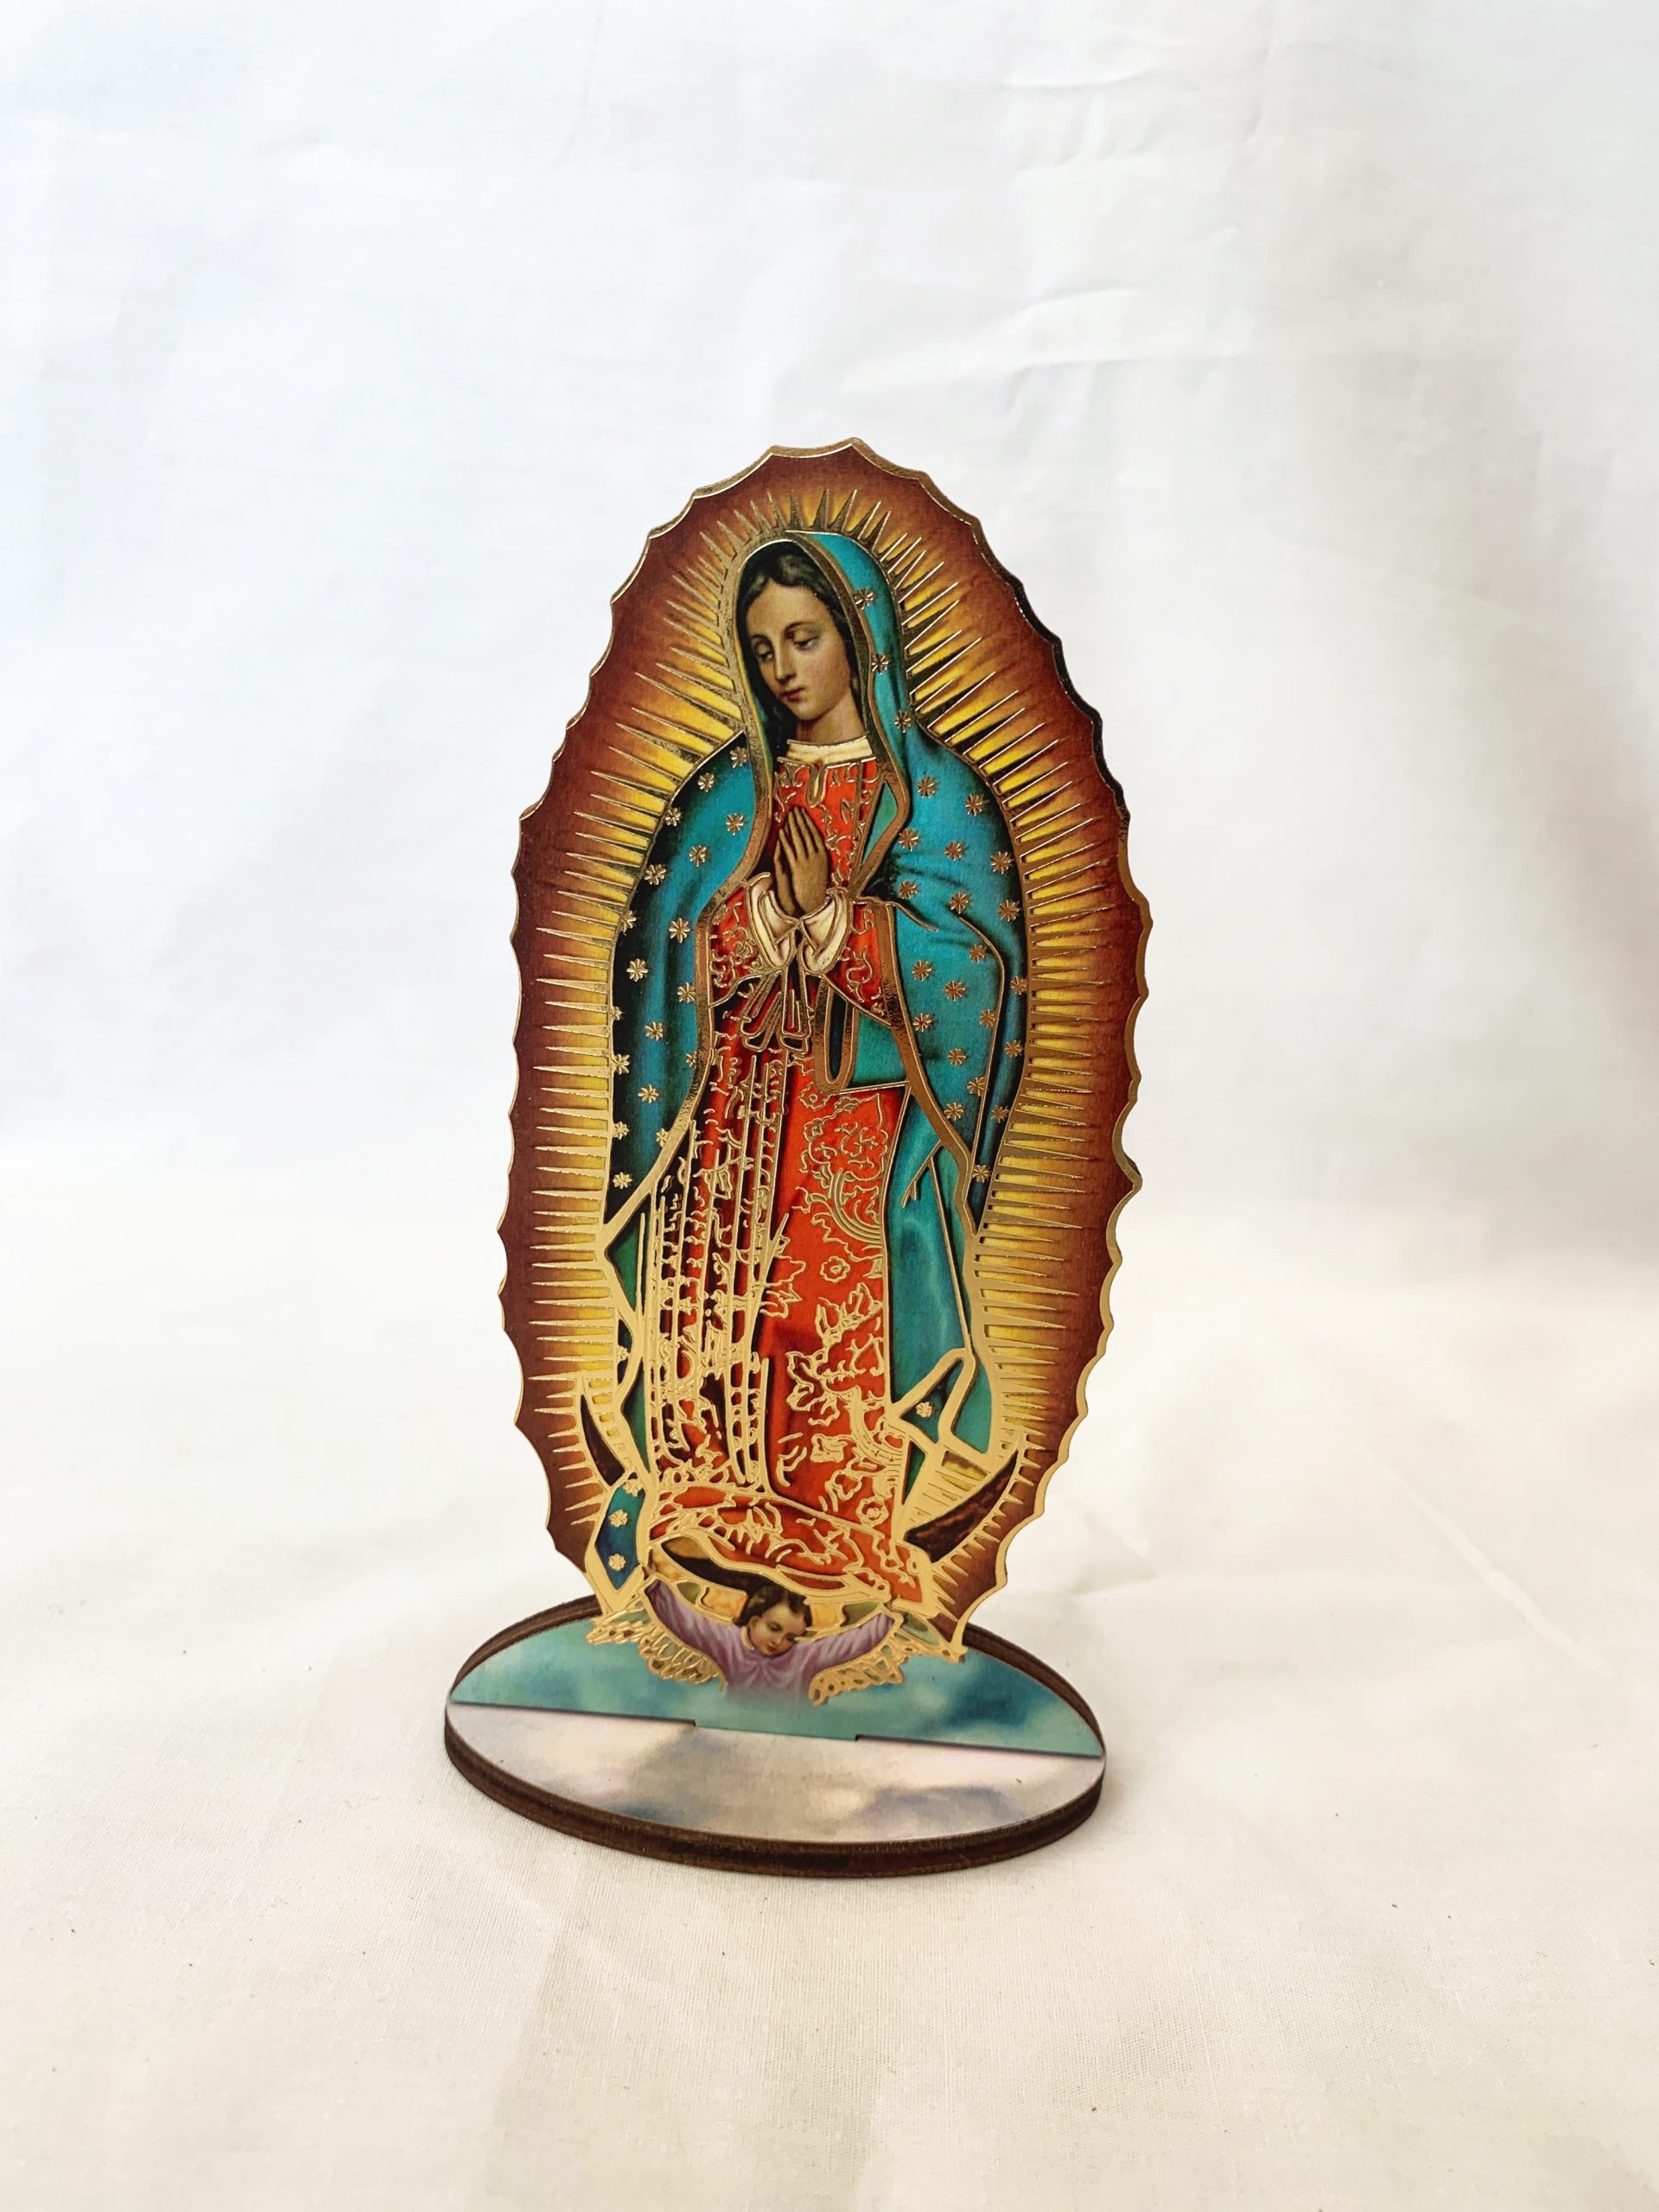 Our Lady Of Guadalupe Statue